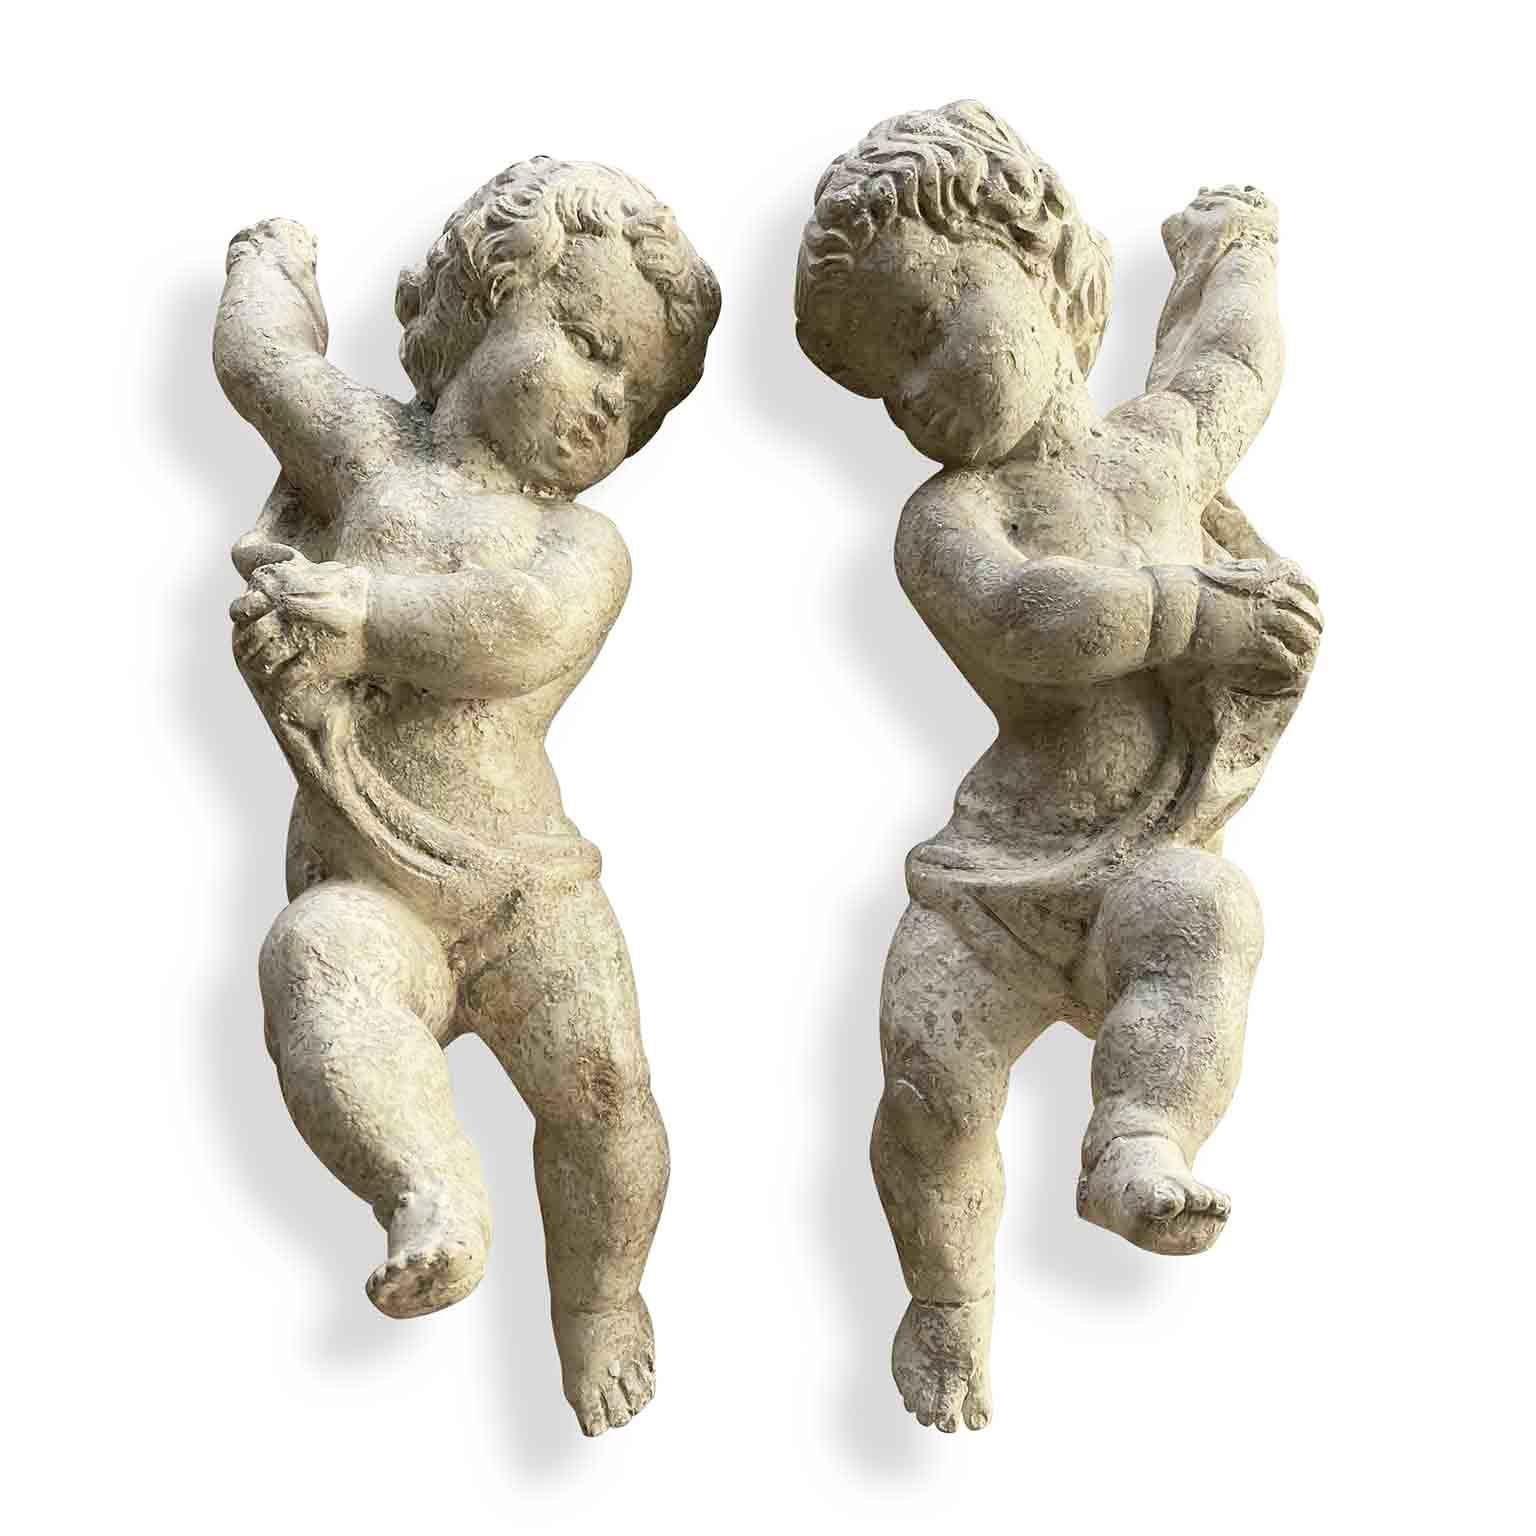 Lovely pair of 19th century Baroque style angels, putti sculptures hand-carved in lime tree, of Italian origin, dating back to 1850 circa in overall good condition.
This pair of antique wall-hanging putti figures have a white-ivory color gesso